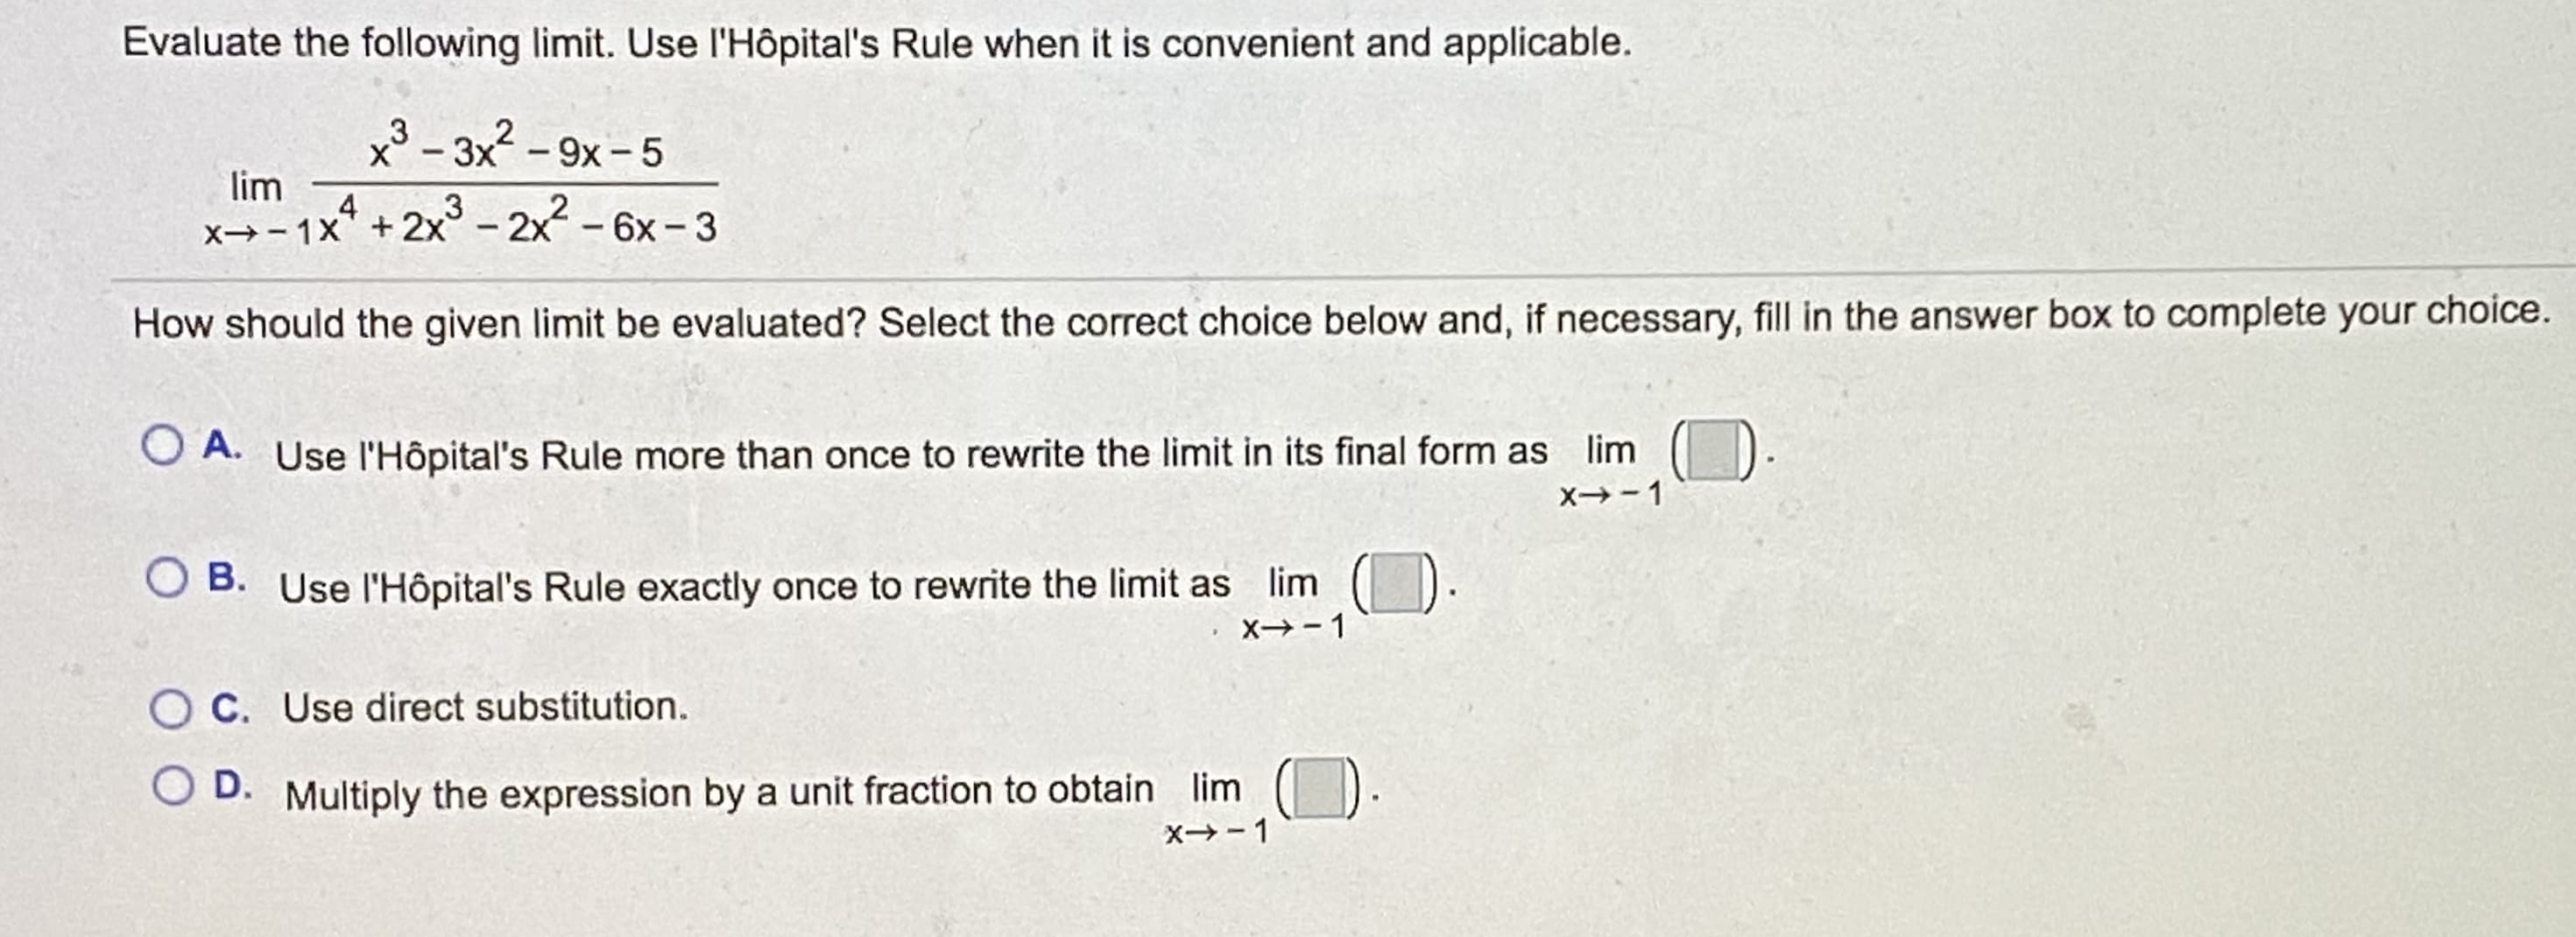 Evaluate the following limit. Use l'Hôpital's Rule when it is convenient and applicable.
x³ - 3x2 -9x- 5
lim
4
x→-1x" + 2x° - 2x - 6x - 3
3
How should the given limit be evaluated? Select the correct choice below and, if necessary, fill in the answer box to complete your choice.
O A. Use l'Hôpital's Rule more than once to rewrite the limit in its final form as lim
O B. Use l'Hôpital's Rule exactly once to rewrite the limit as lim
C. Use direct substitution.
D.
Multiply the expression by a unit fraction to obtain lim
